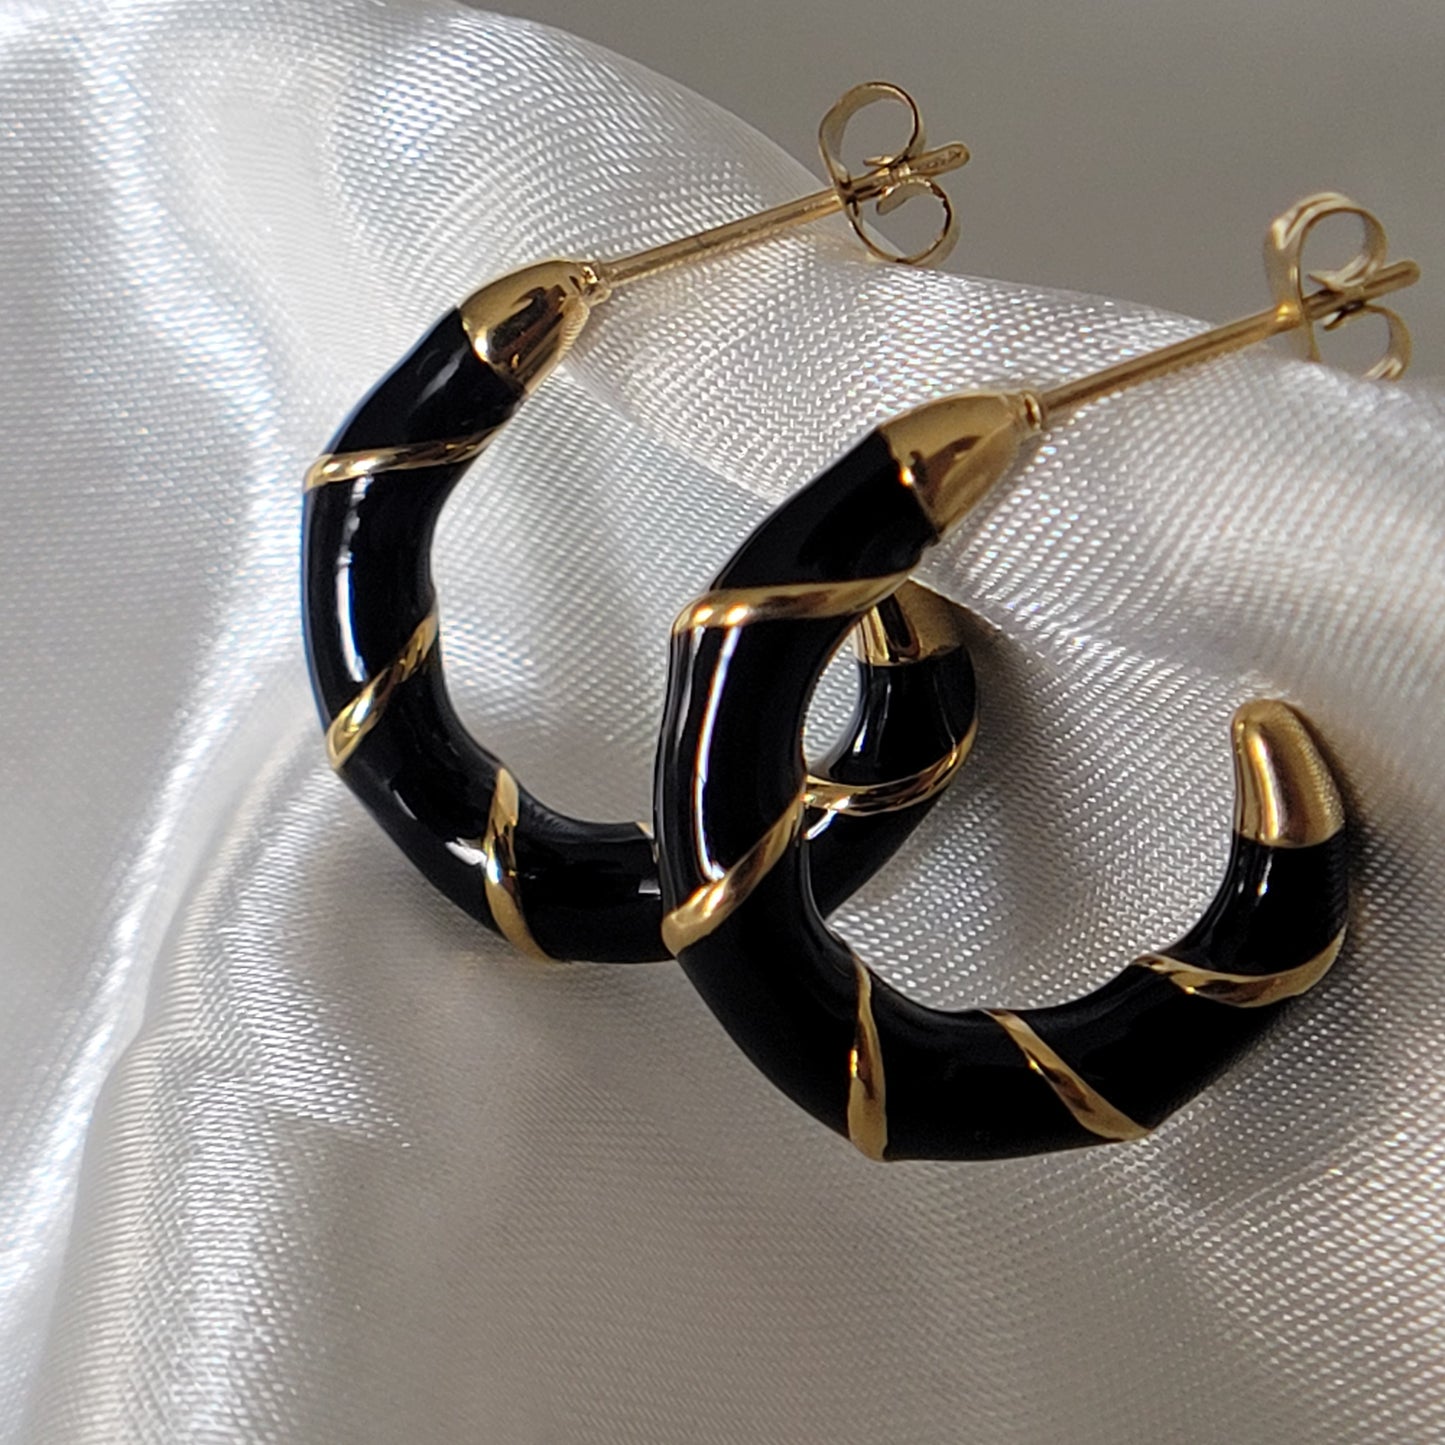 Strip Hoop Earring - Gold and White / Gold and Black